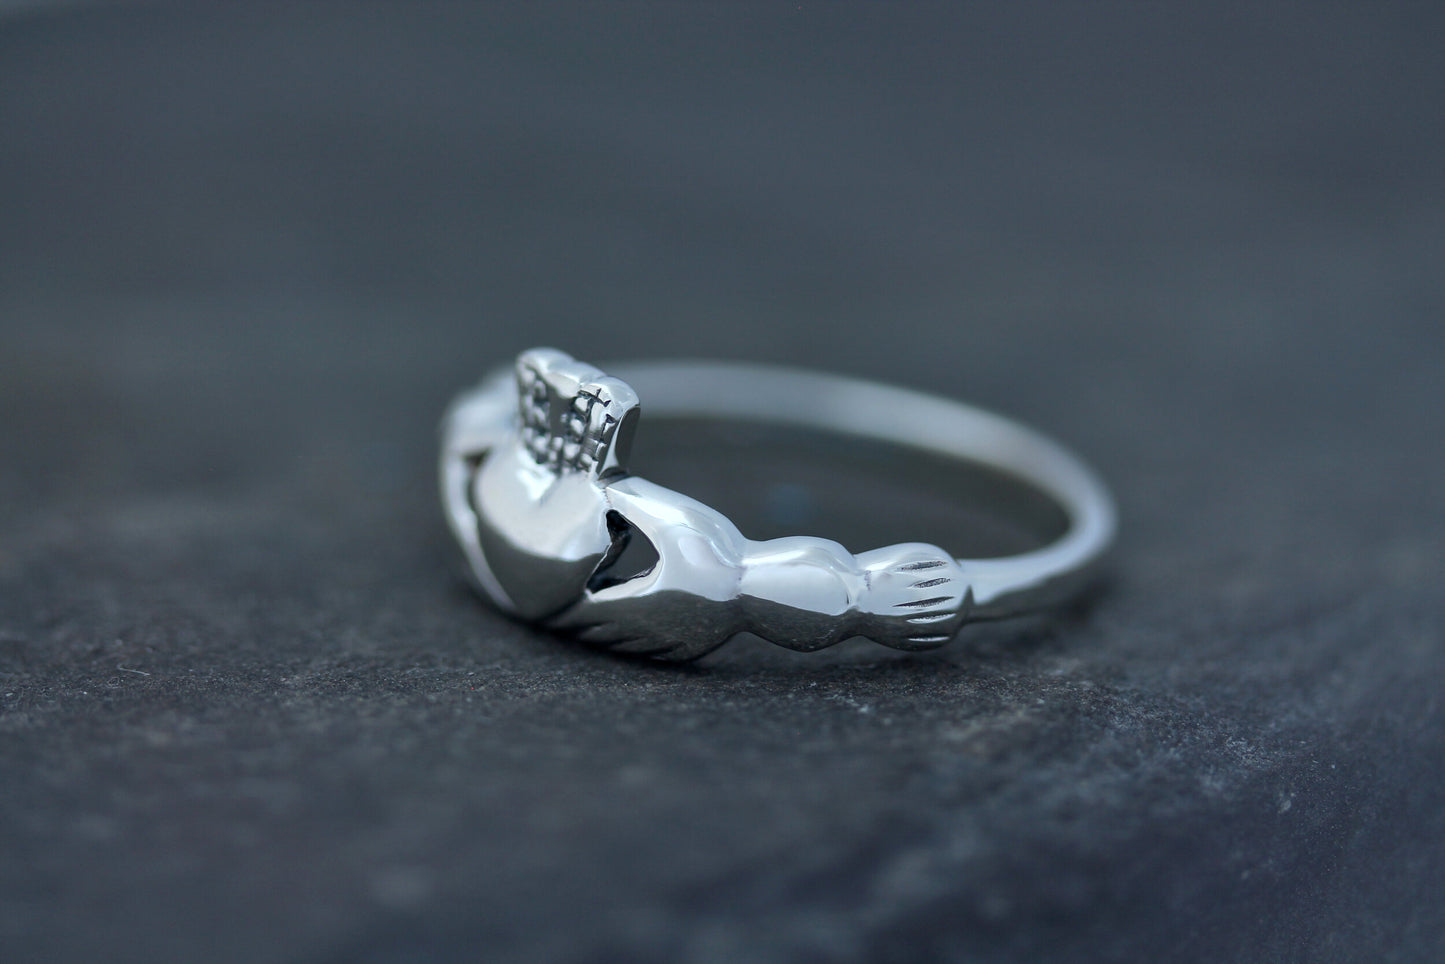 Claddagh Ring - Smooth Convex Heart